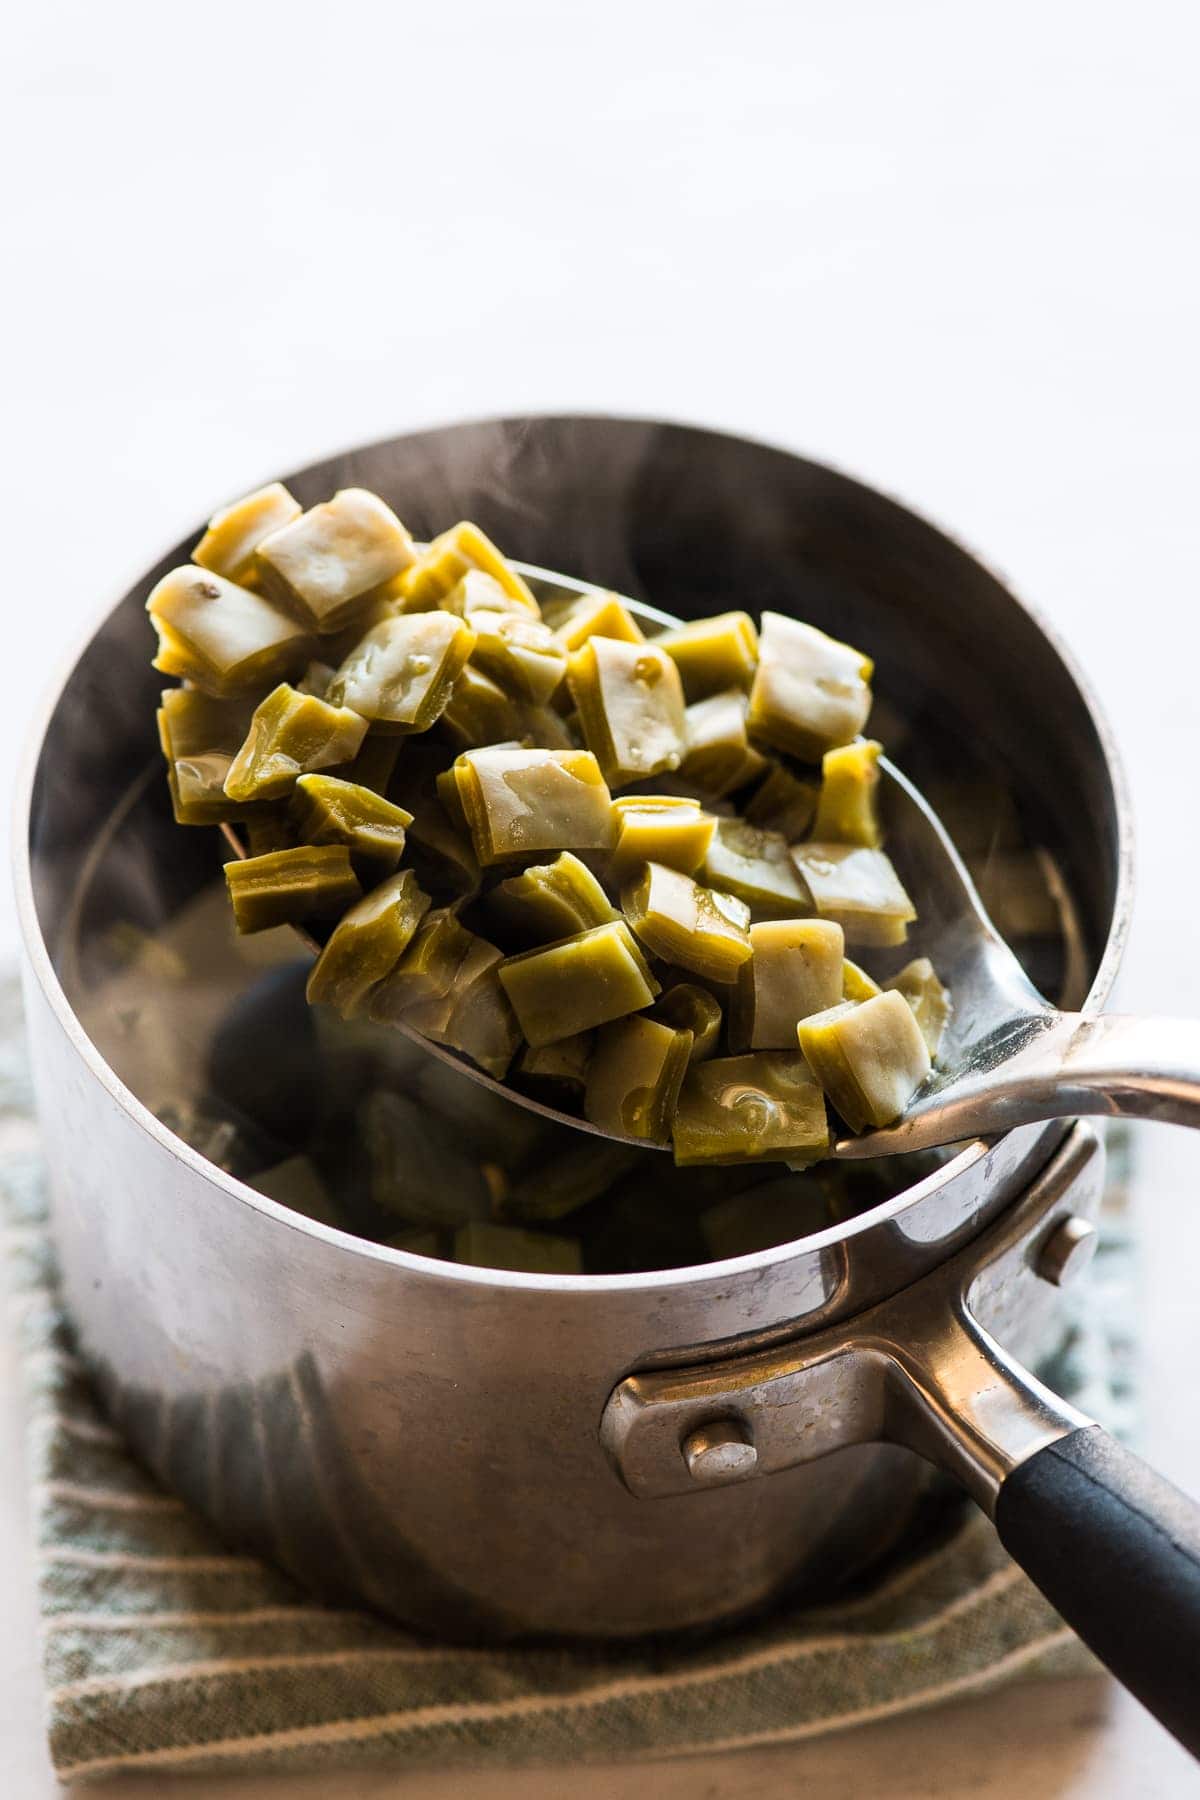 How to Cook Nopales